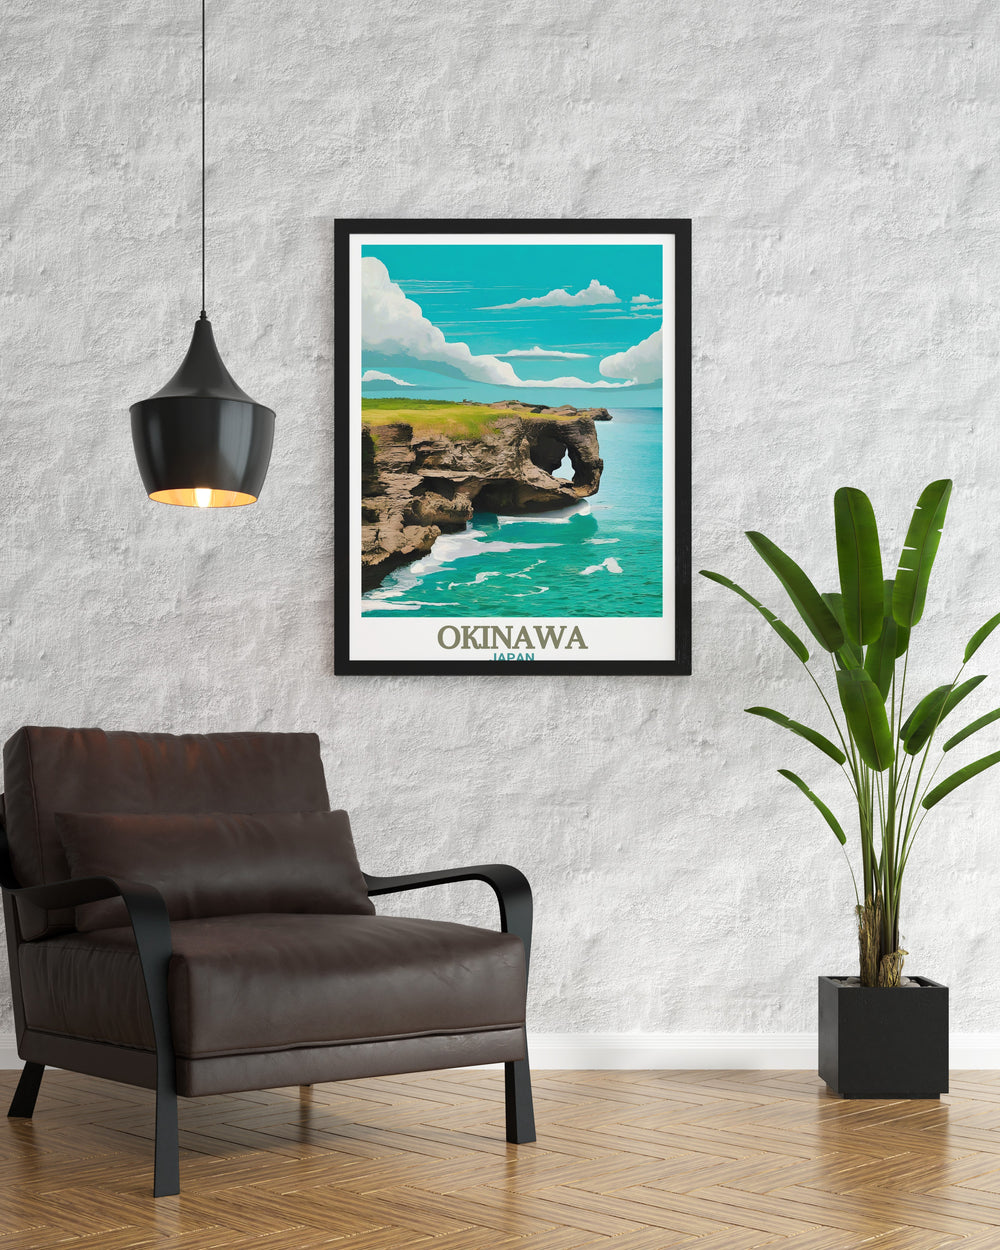 Beautiful Cape Manzamo artwork capturing the vibrant colors and breathtaking landscapes of Okinawa ideal for anyone looking to add a piece of the Okinawa Islands to their wall art collection